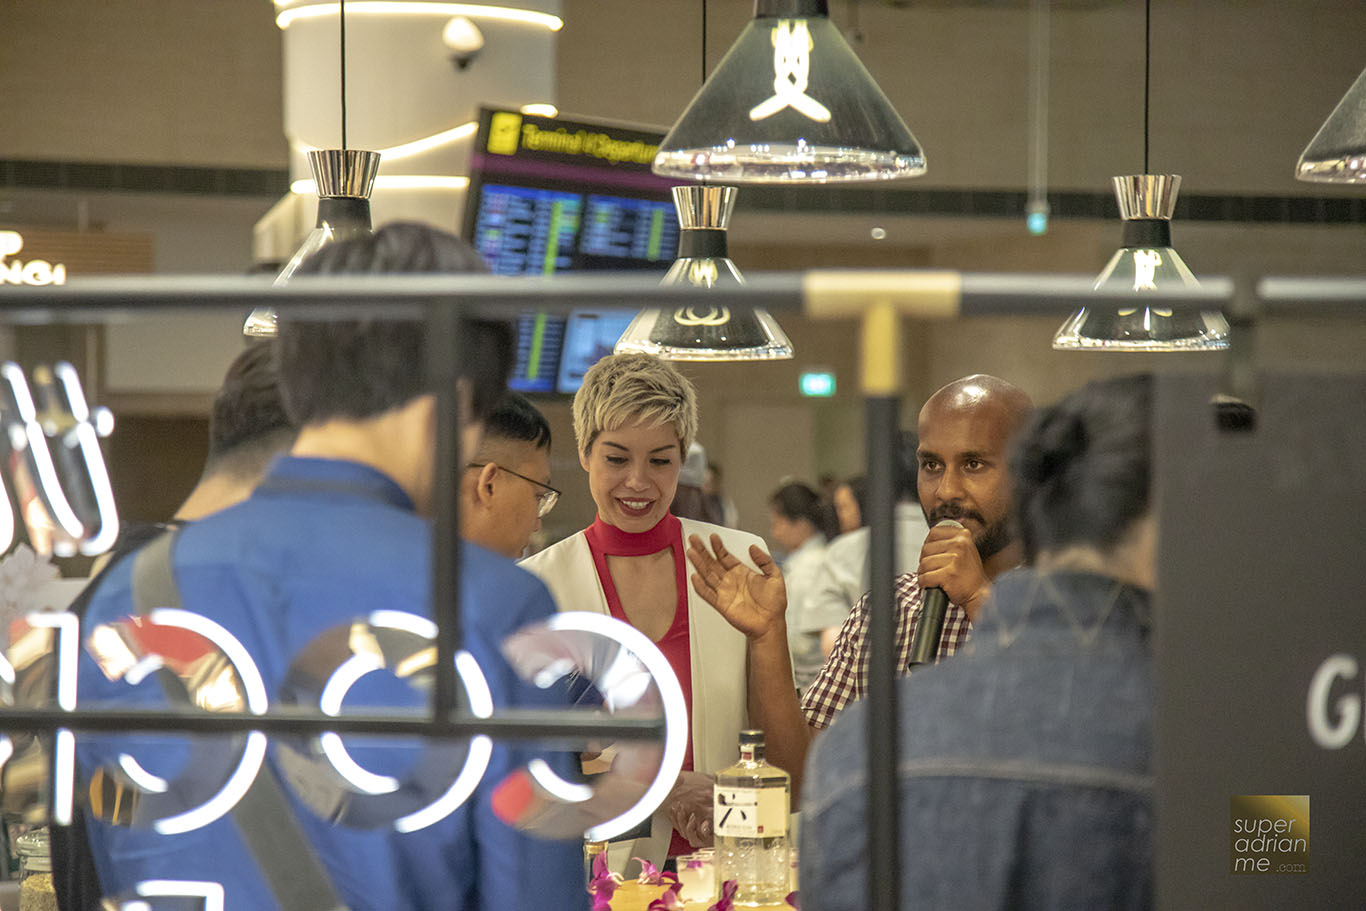 The DFS Craft Festival happening till end October 2018 at Changi Airport's four terminals.